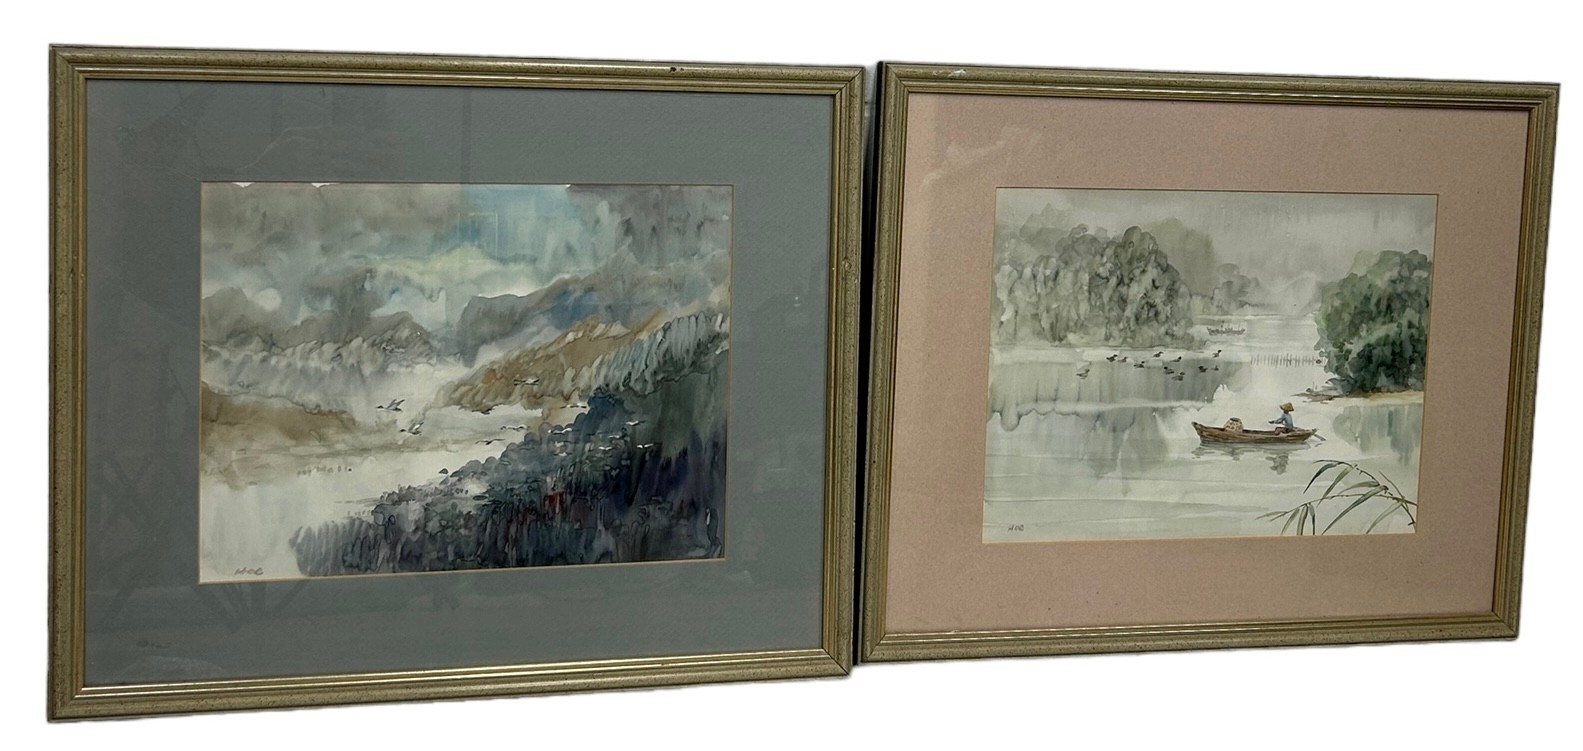 A PAIR OF WATERCOLOURS DEPICTING SOUTH EAST ASIAN VIEWS OF LAKE SCENES, SINGAPORE OR VIETNAM' (2),